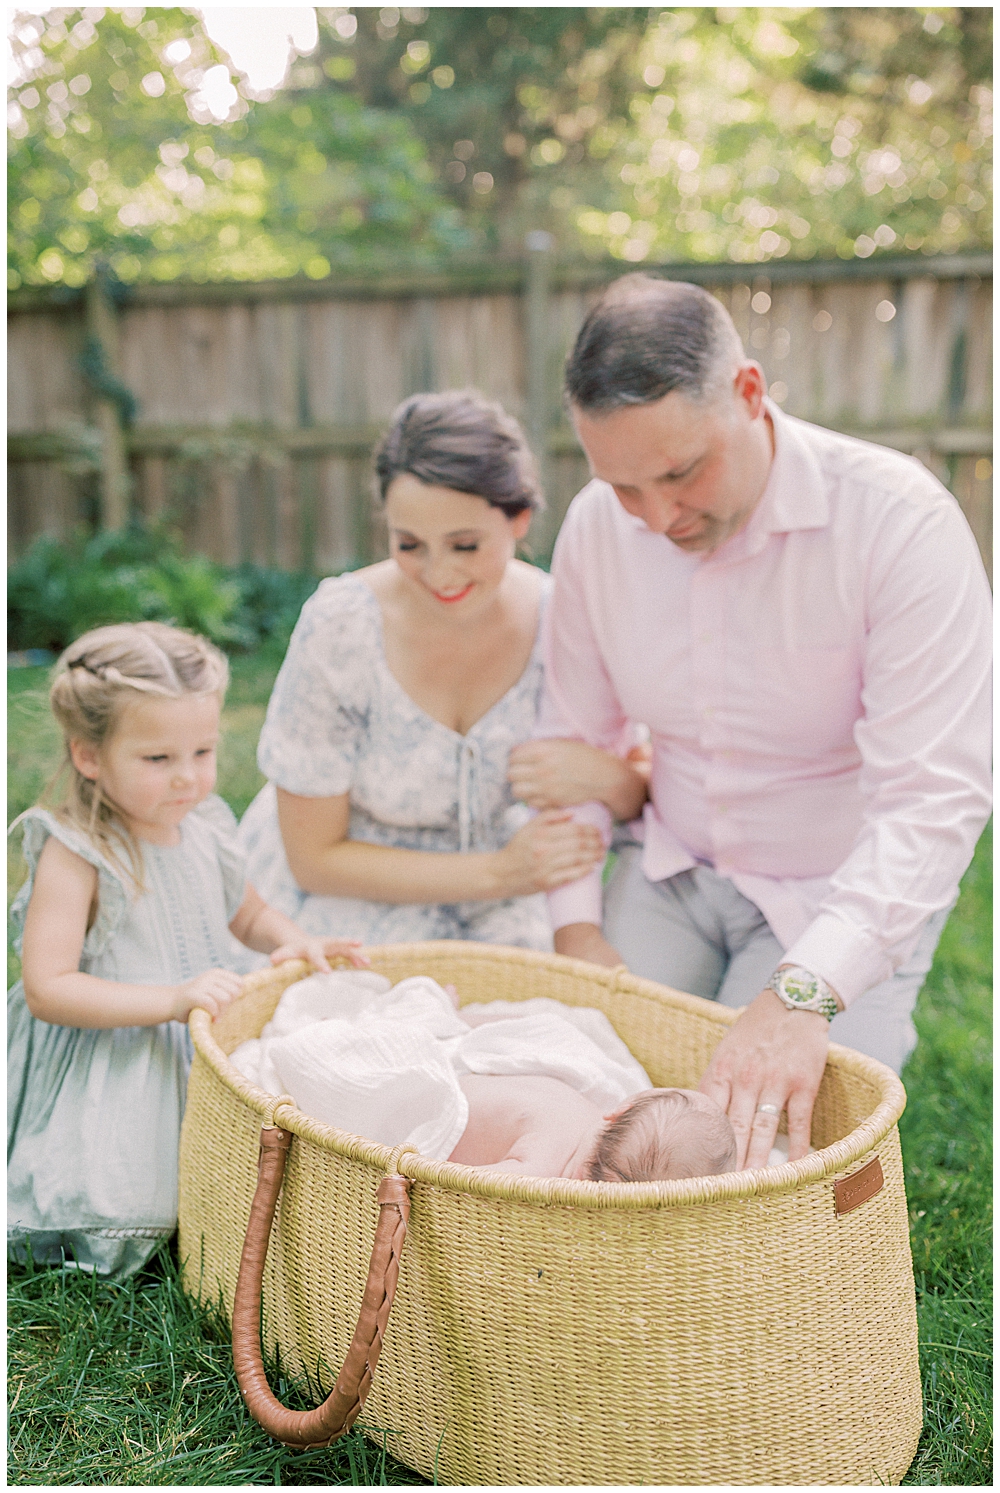 Mother, father, and big sister lean over a Moses basket admiring their new baby during their outdoor newborn session